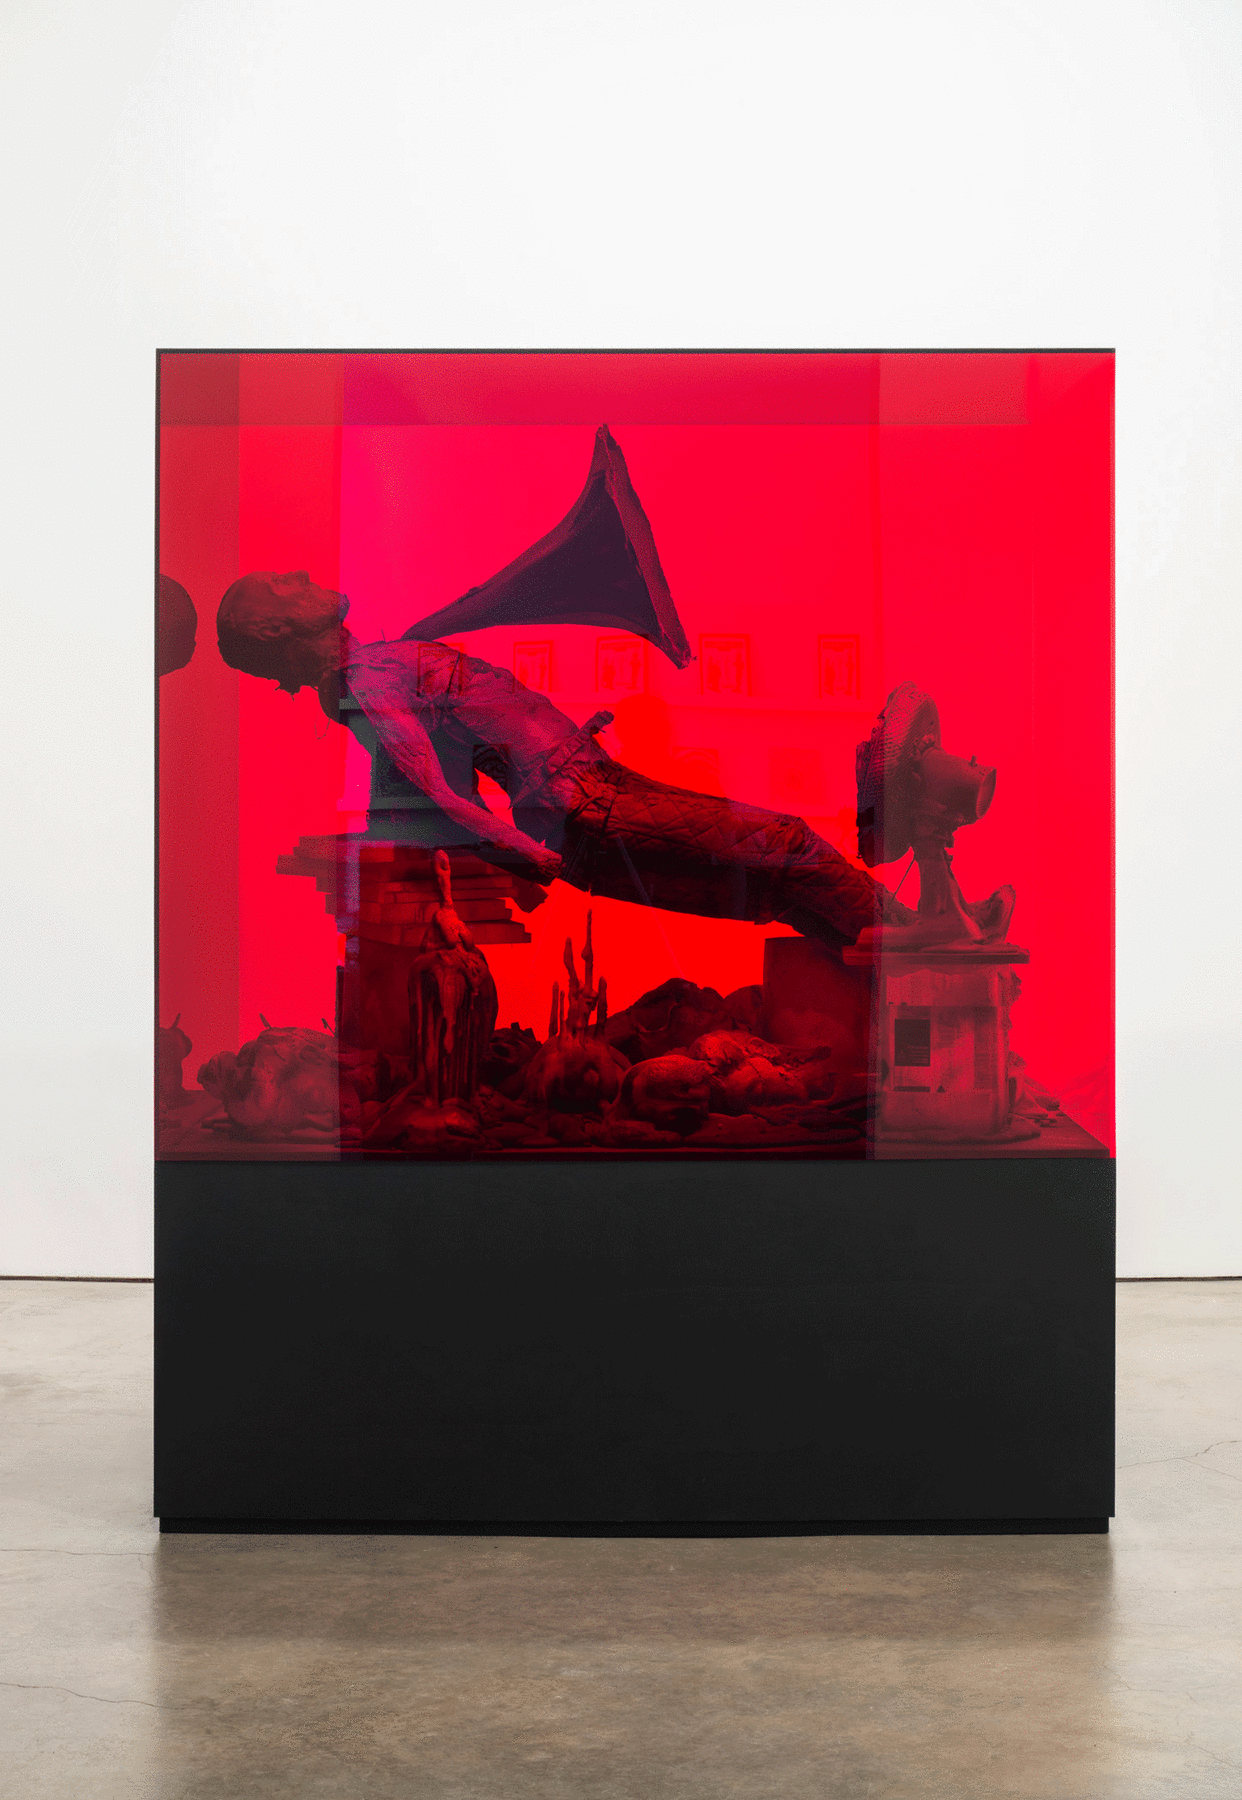 sculpture of a man with airhorn coming out of his chest encased in red tinted glass